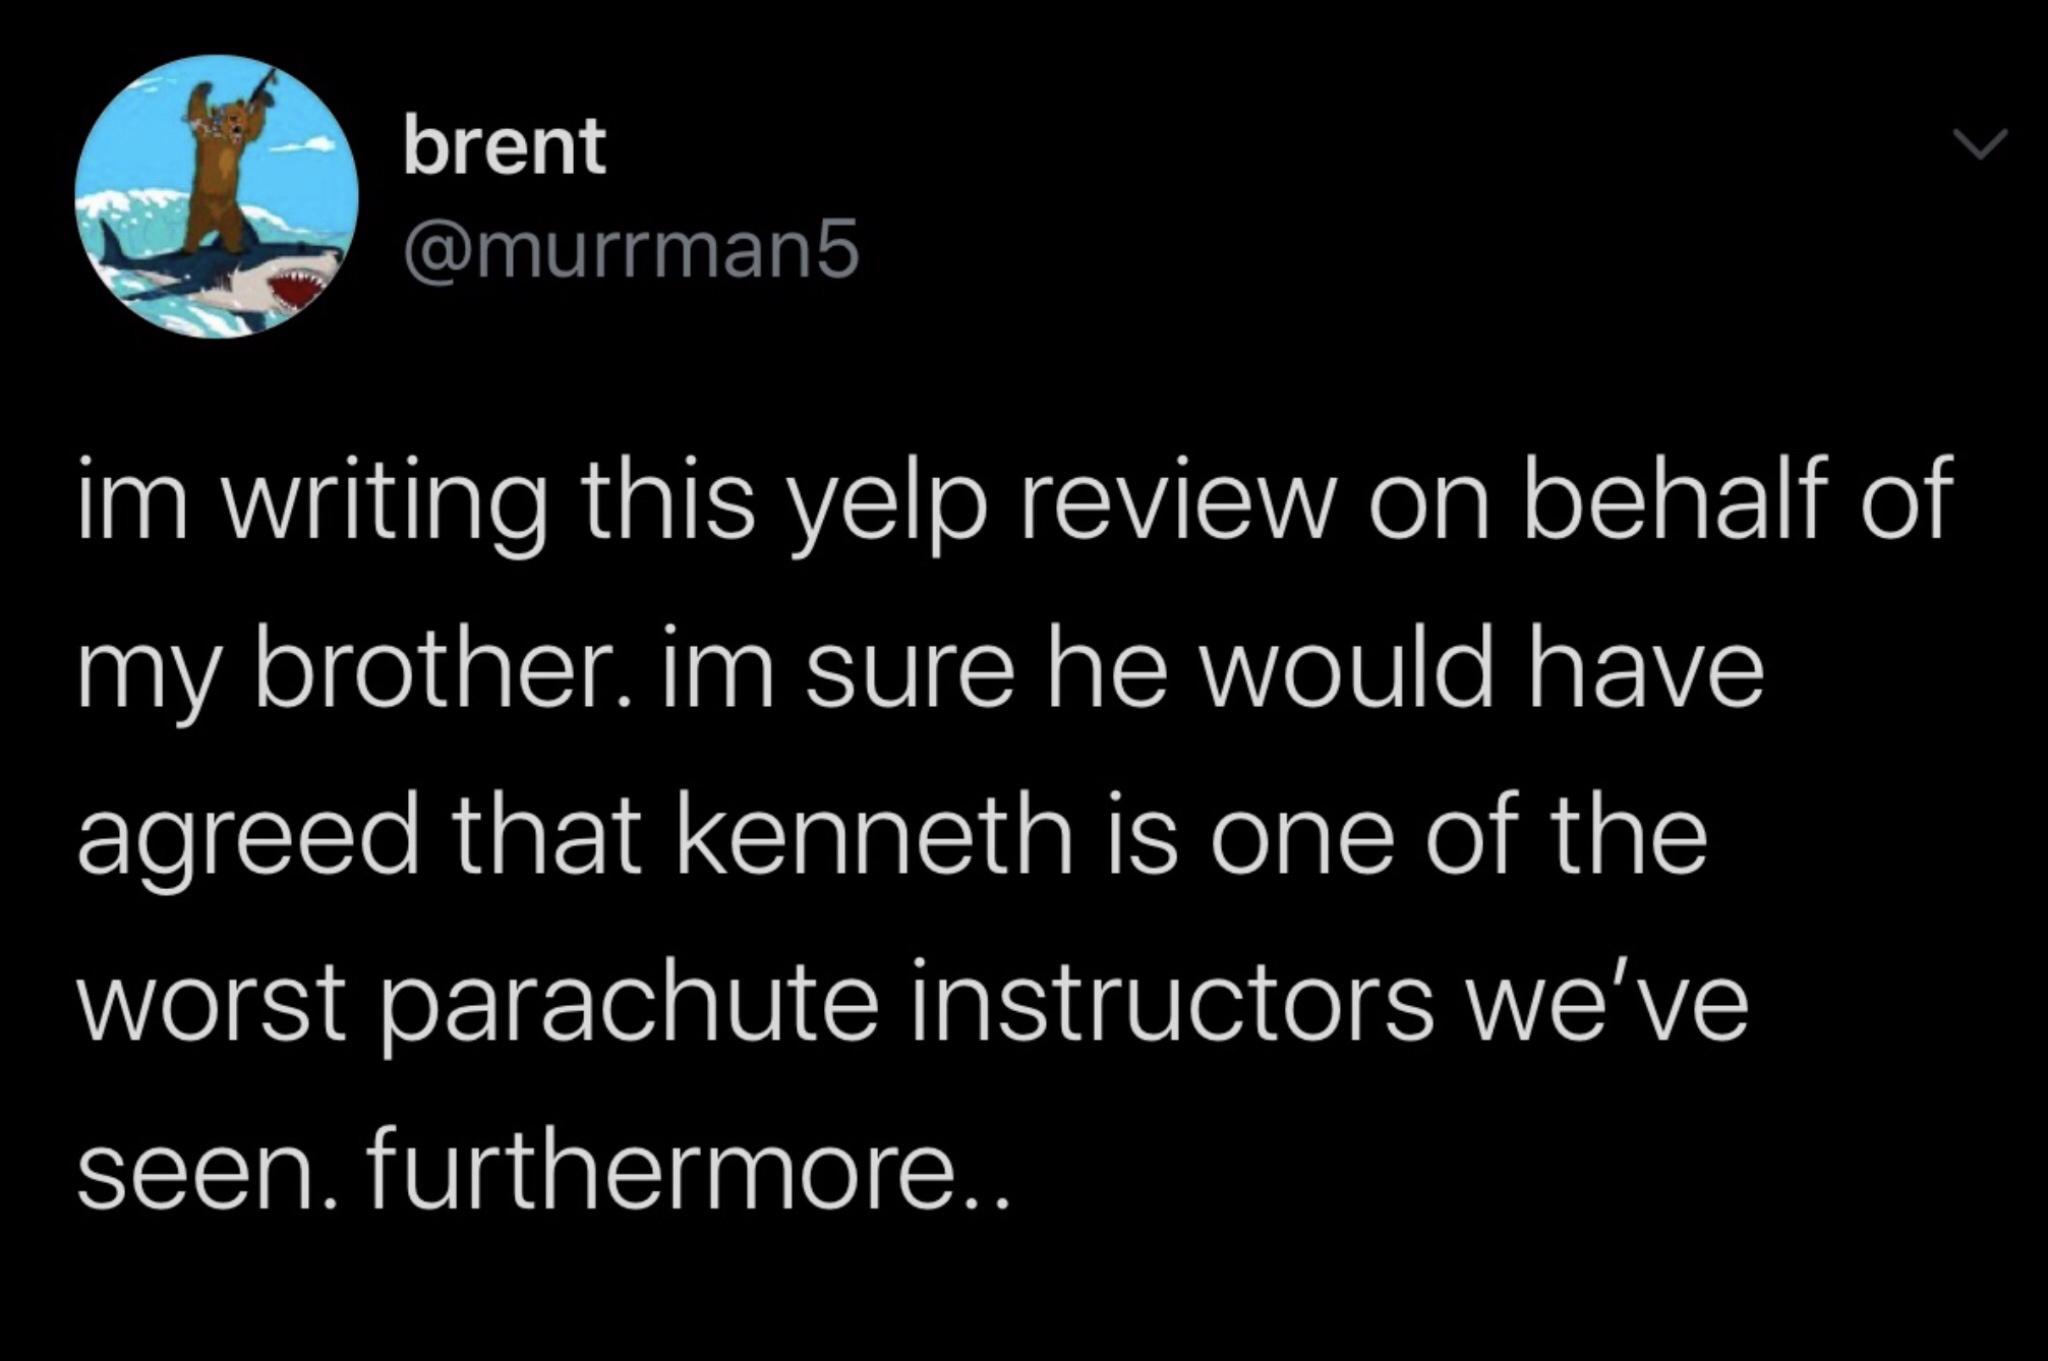 funny tweets - grink there - brent im writing this yelp review on behalf of my brother. im sure he would have agreed that kenneth is one of the worst parachute instructors we've seen. furthermore..